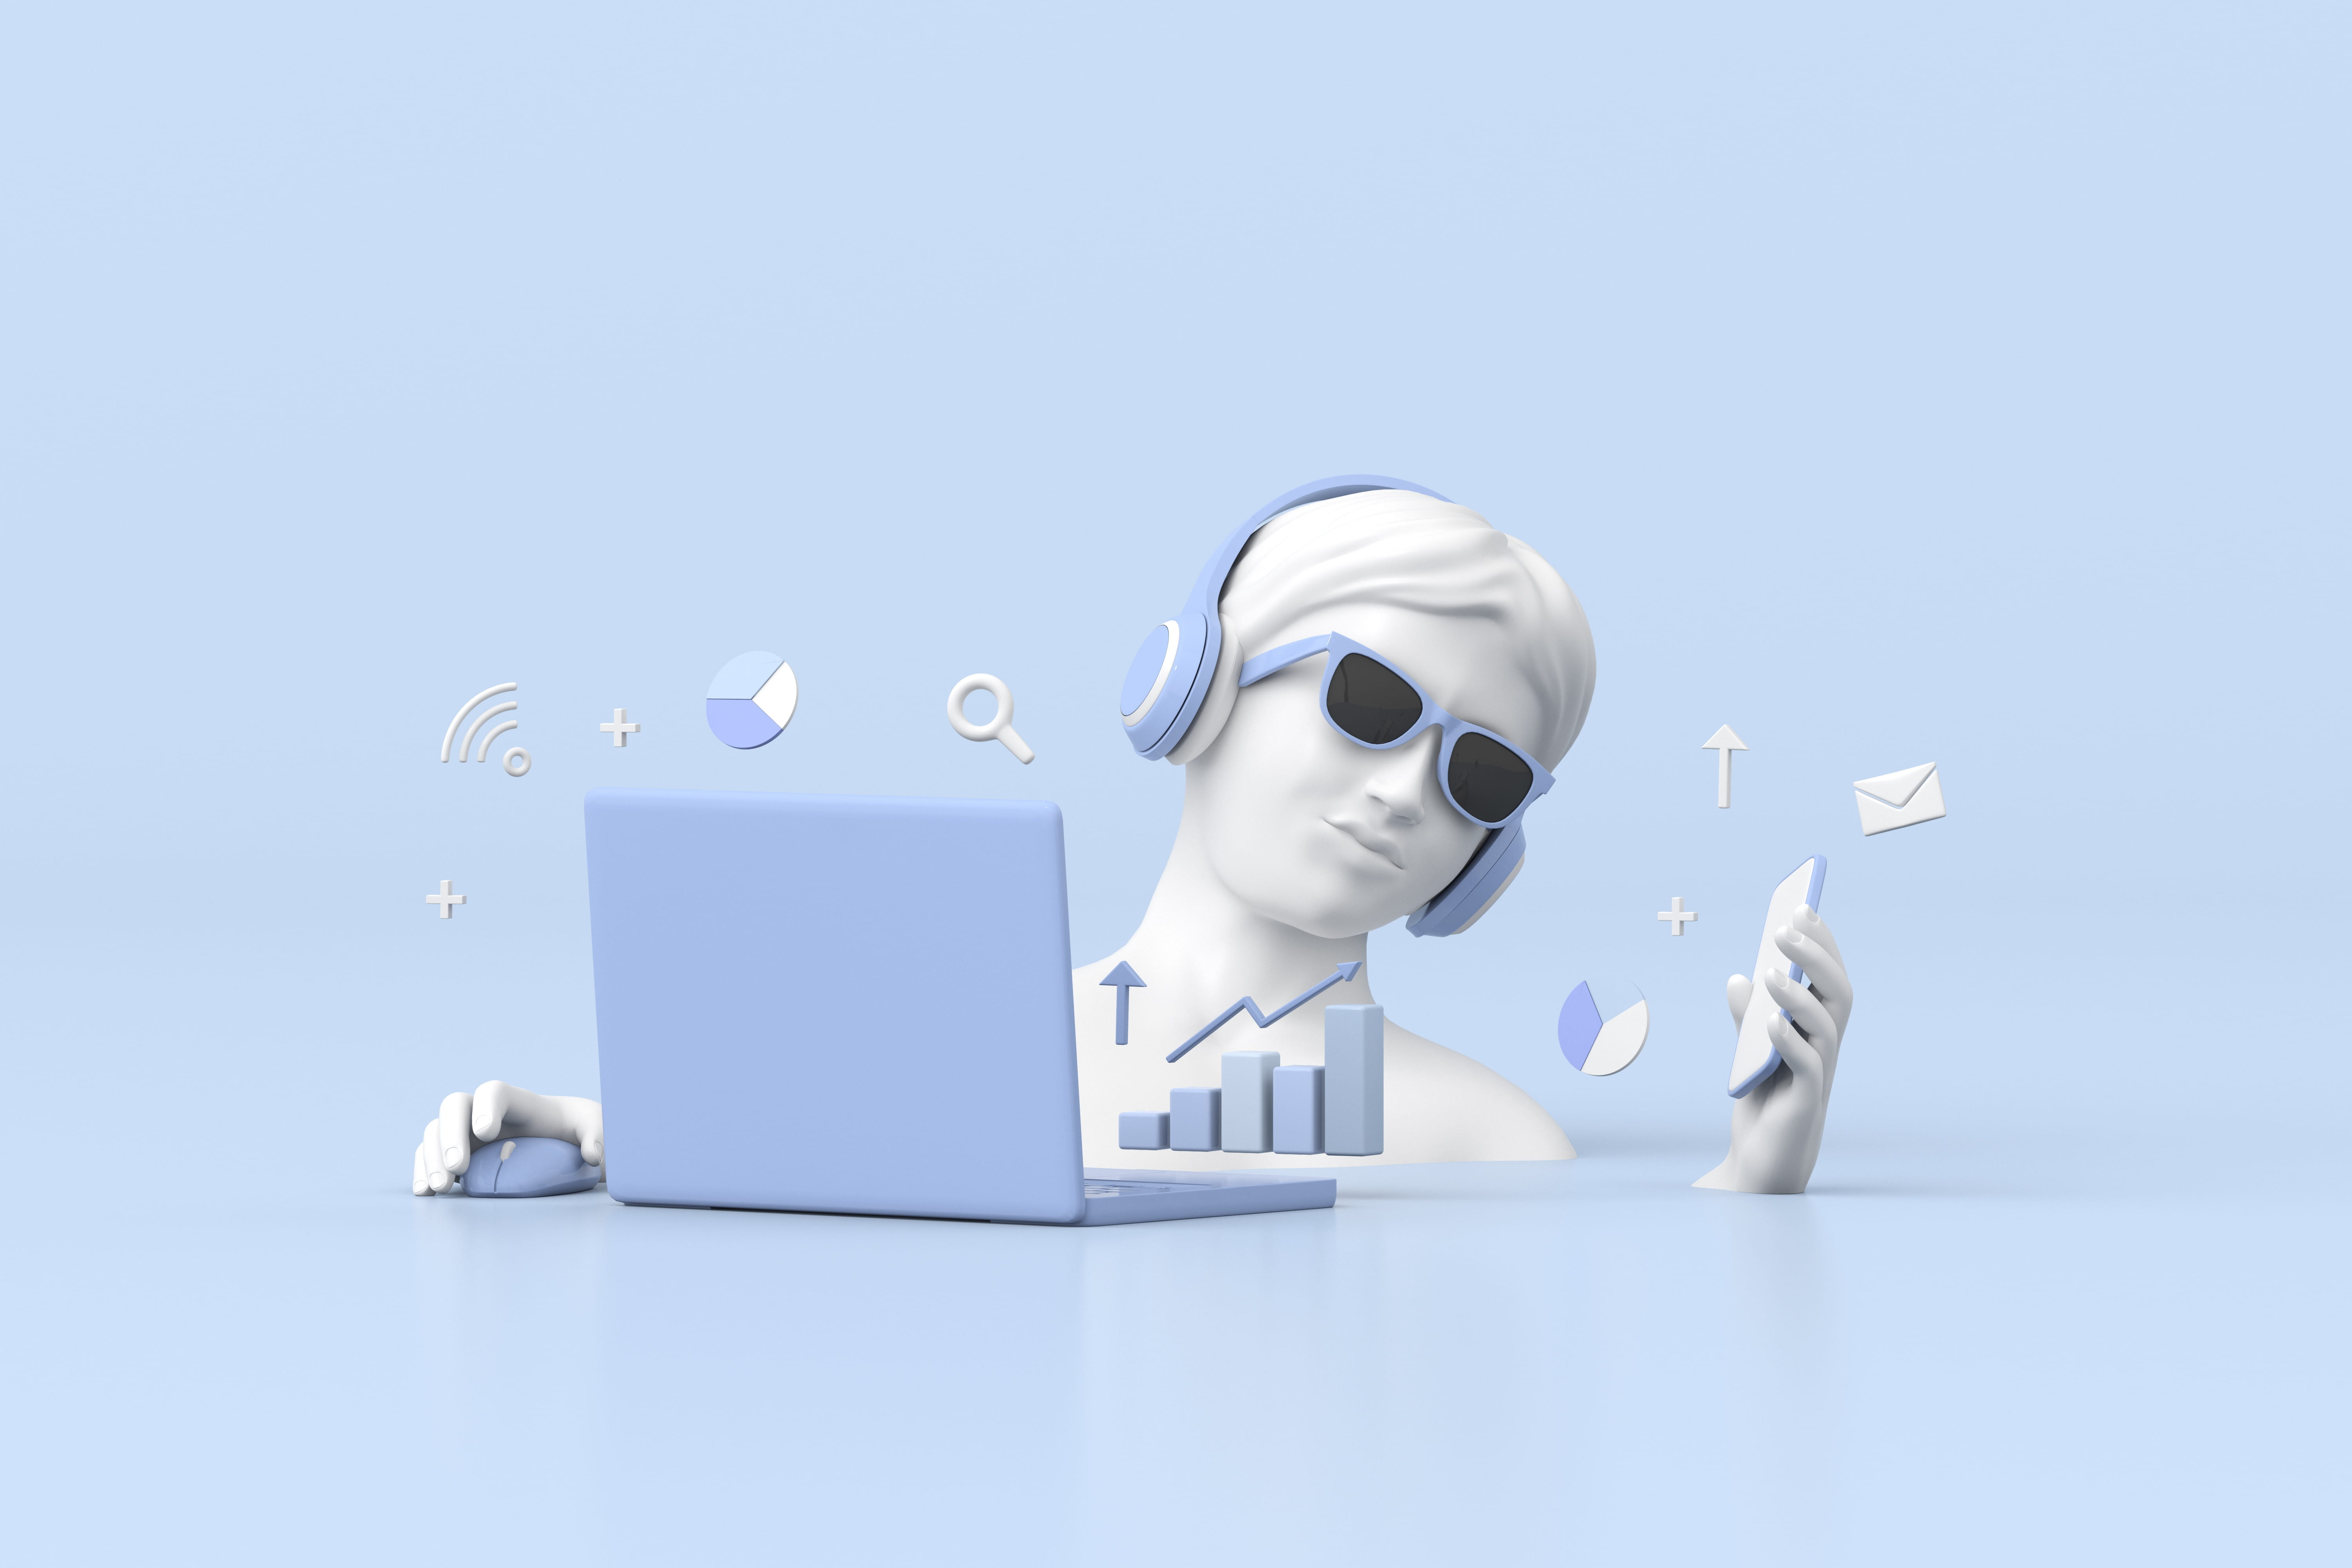 Animated man with sunglasses